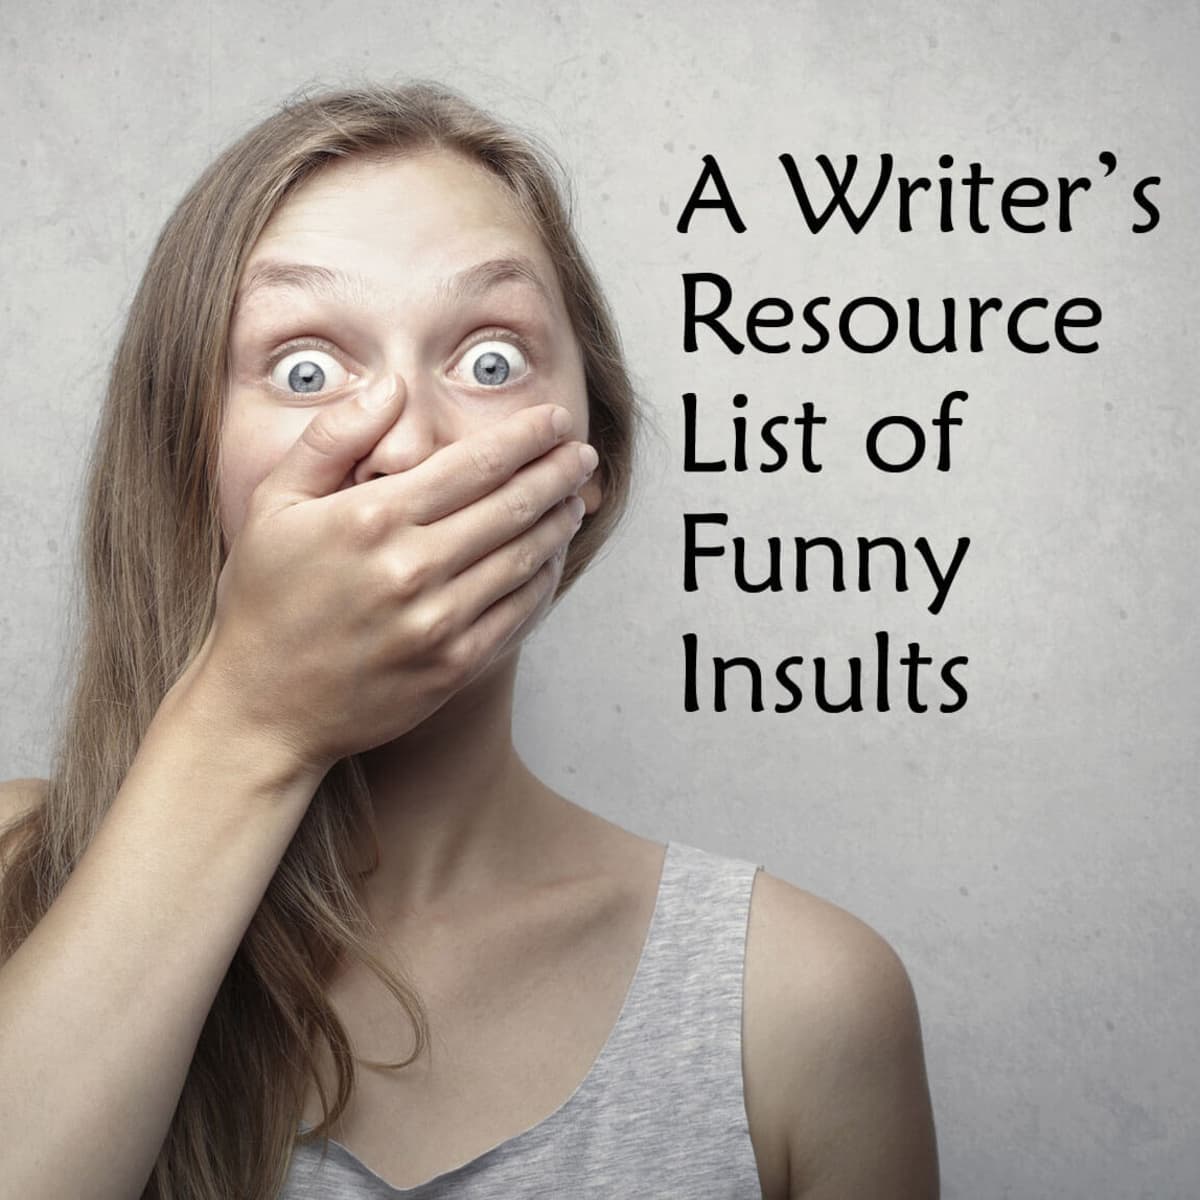 A Writer's Resource List of Funny Insults - HobbyLark